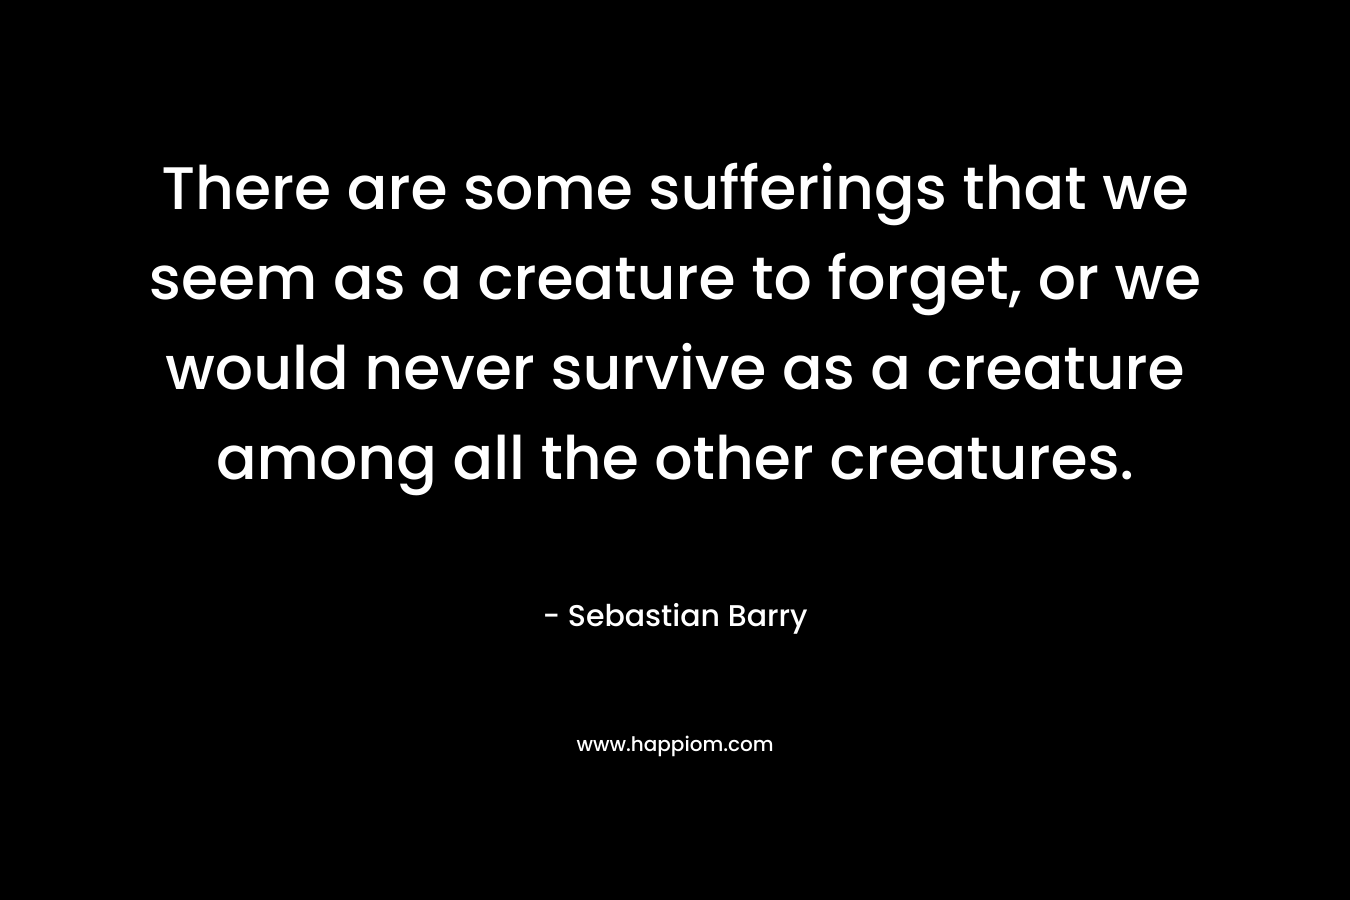 There are some sufferings that we seem as a creature to forget, or we would never survive as a creature among all the other creatures. – Sebastian Barry